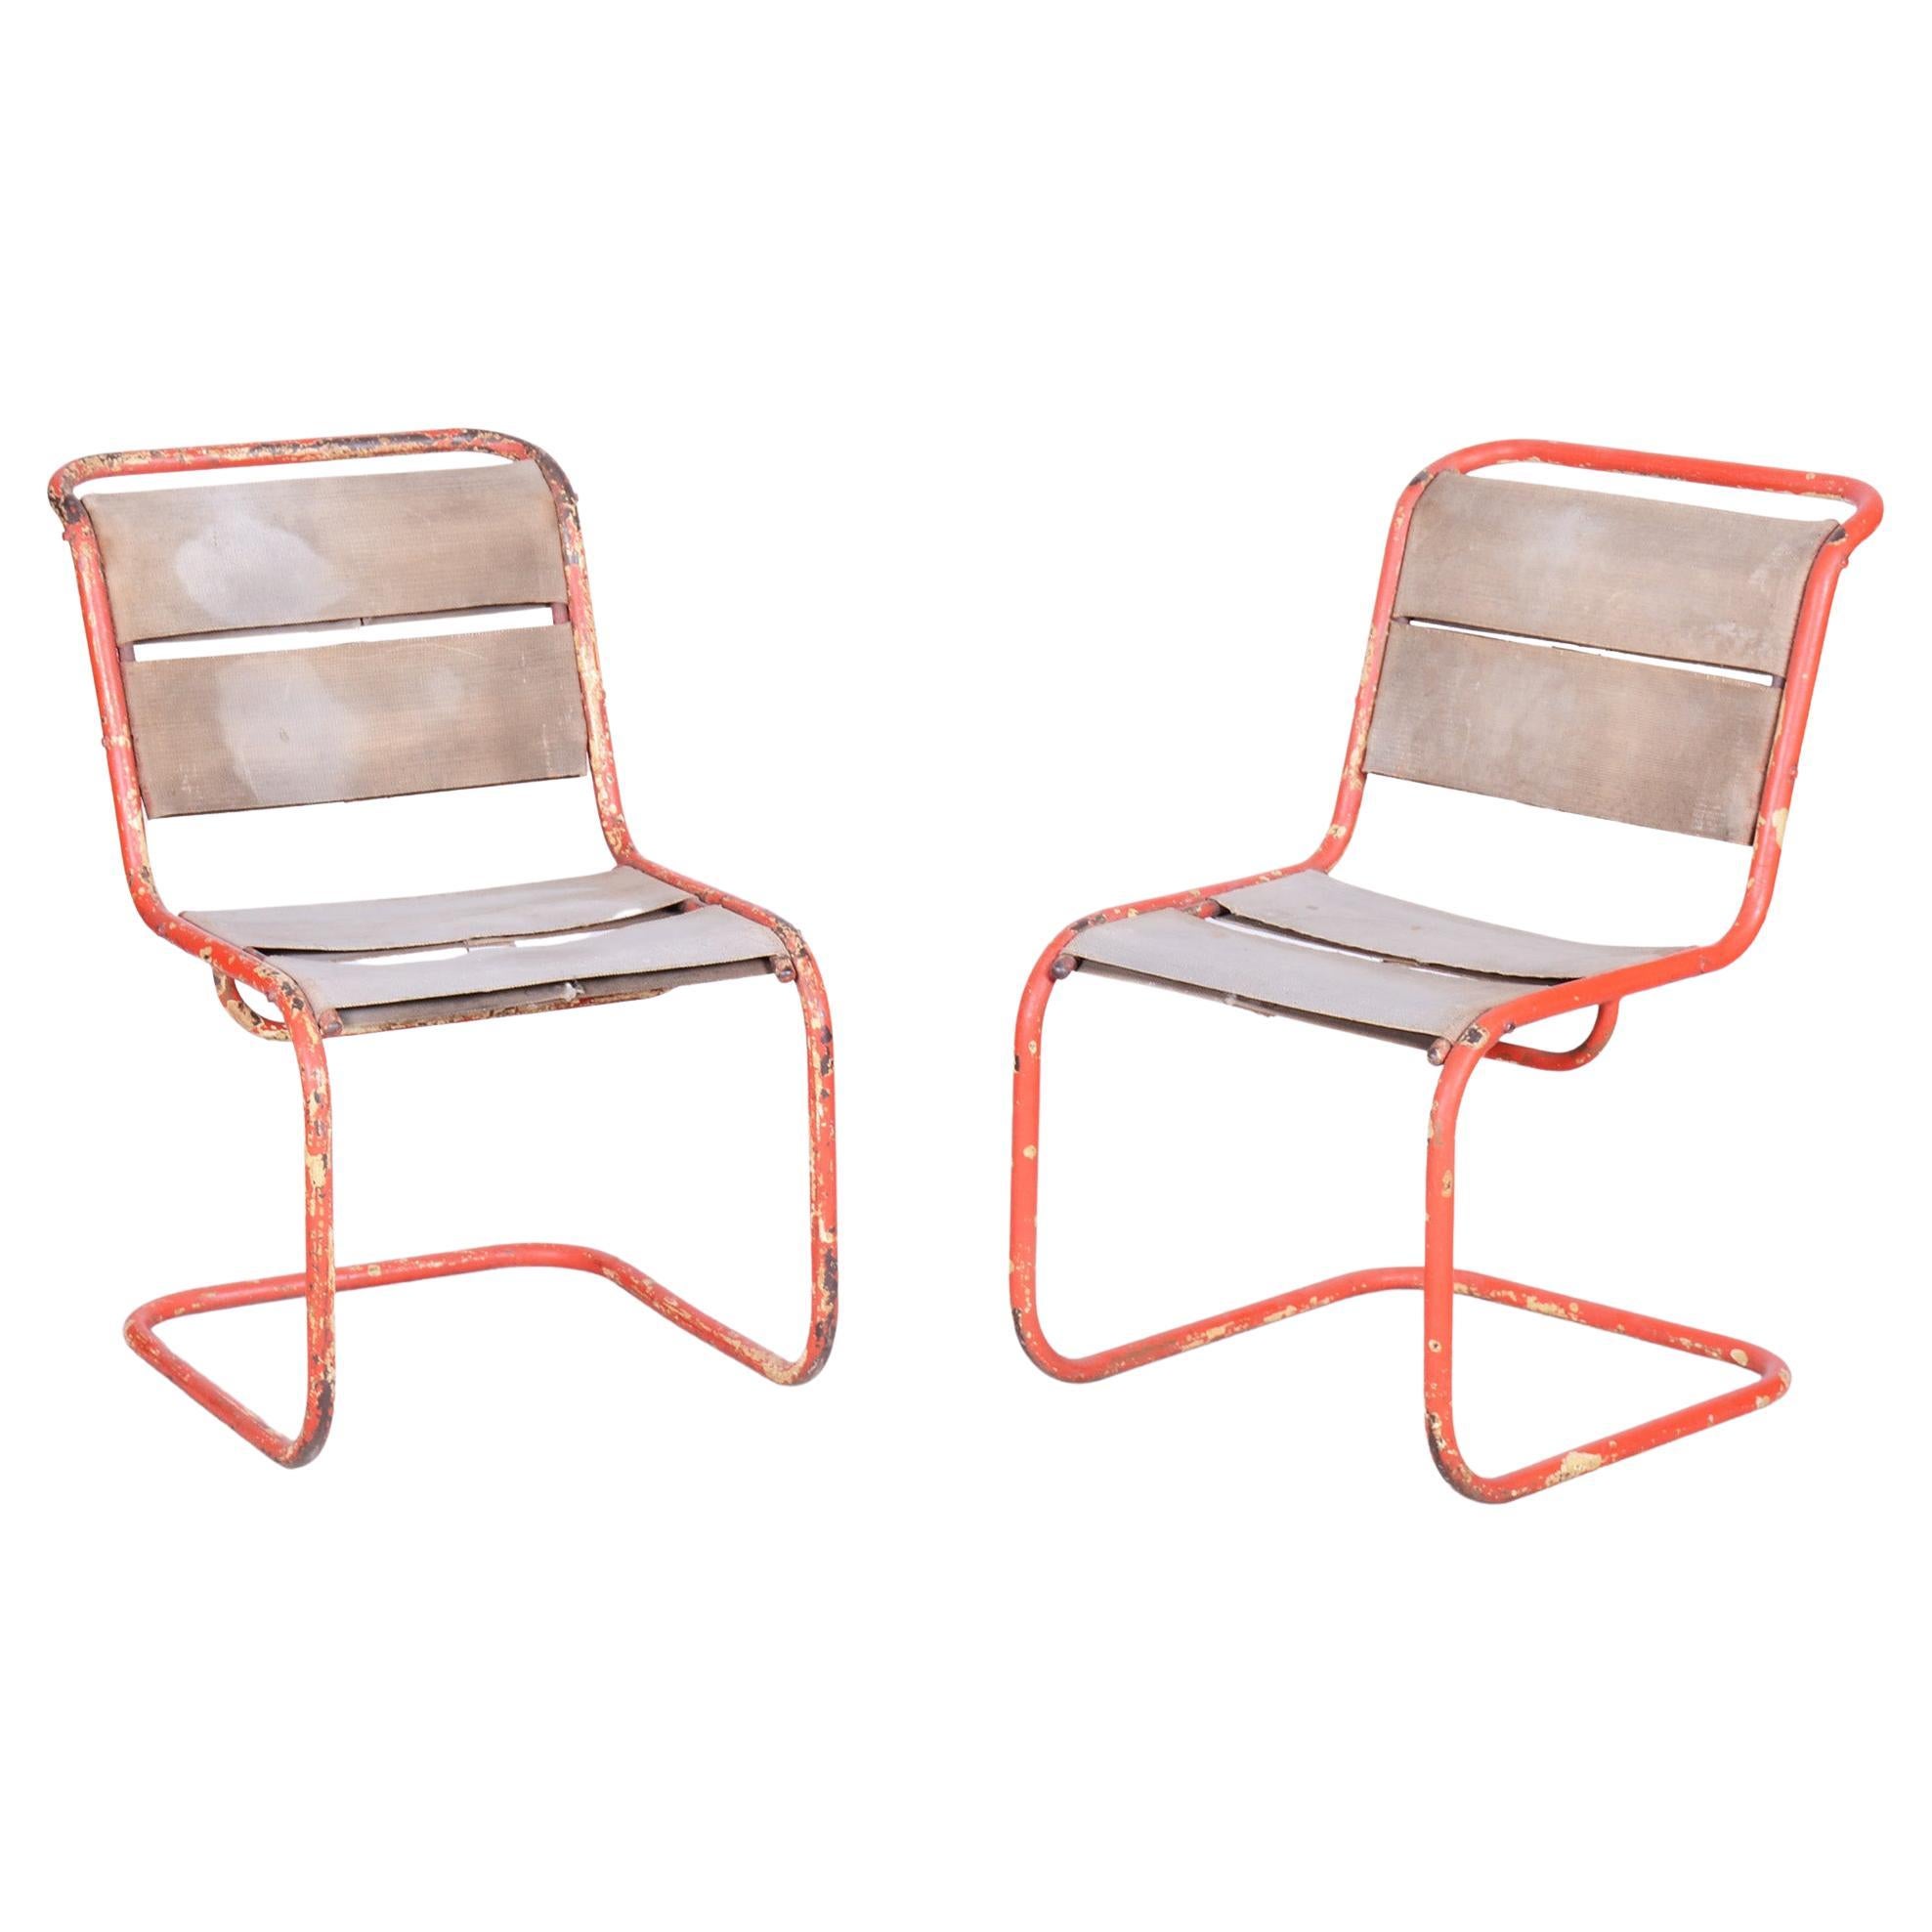 Original Pair of Chairs by Josef Gocar, Lacquered Steel, Czechia, 1930s